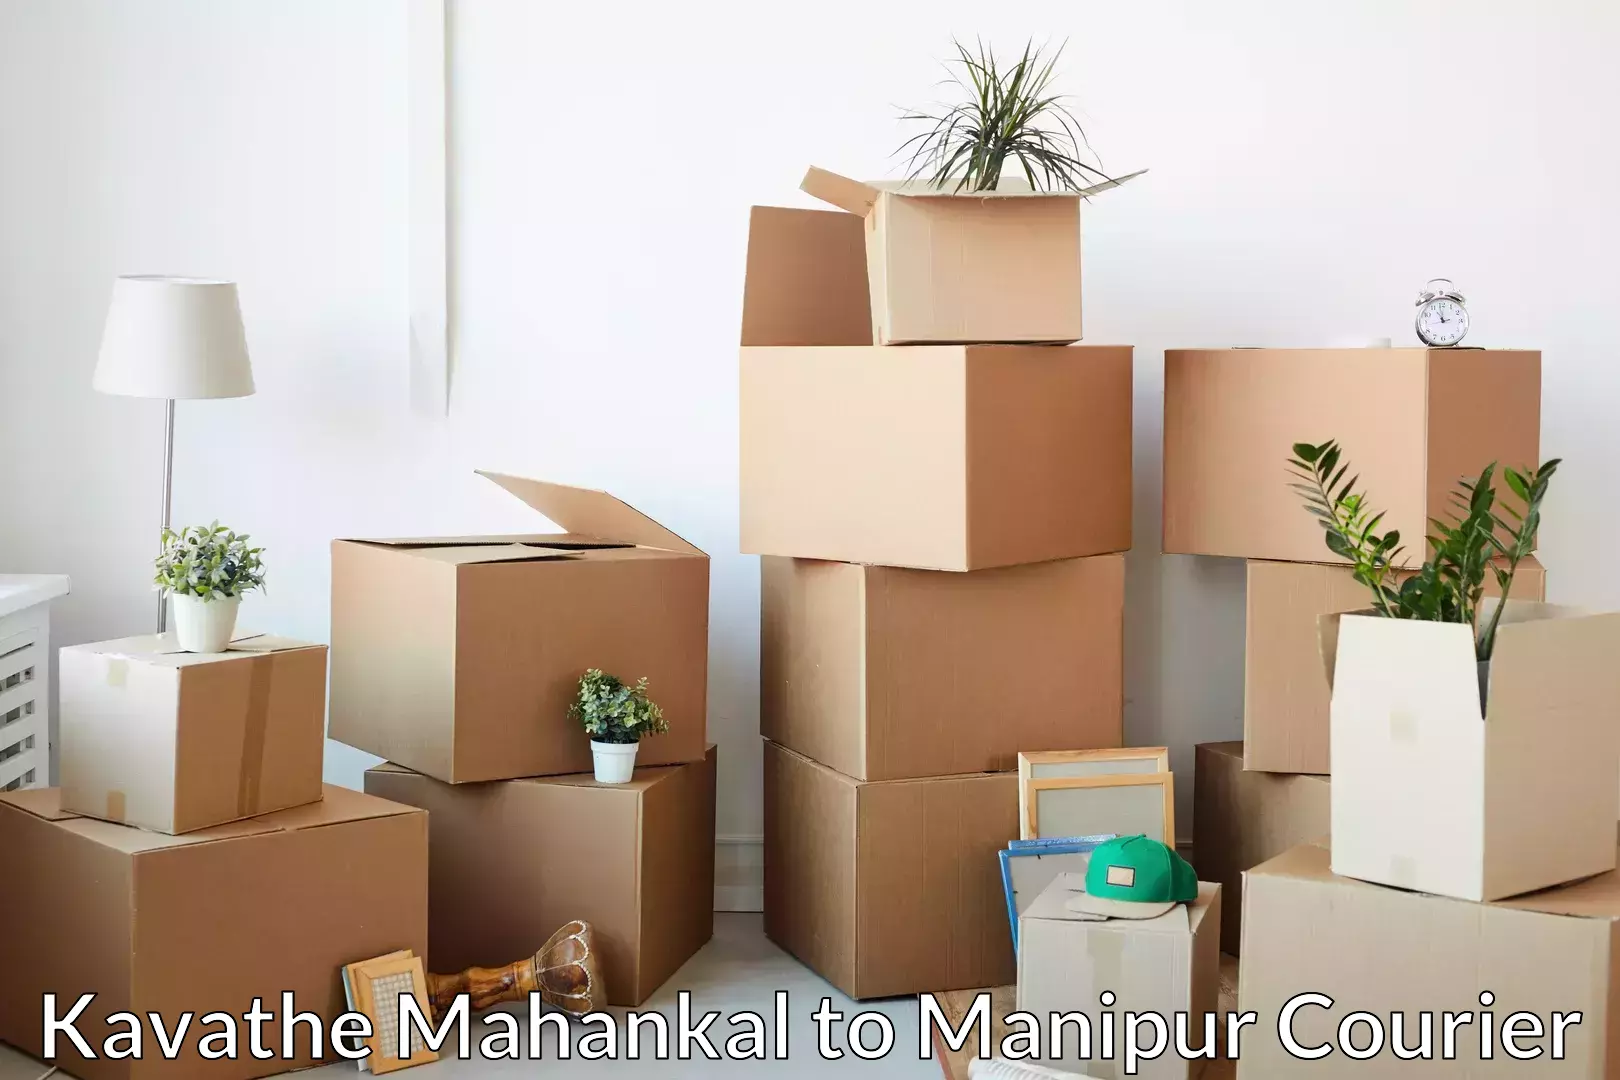 Affordable relocation solutions Kavathe Mahankal to Imphal